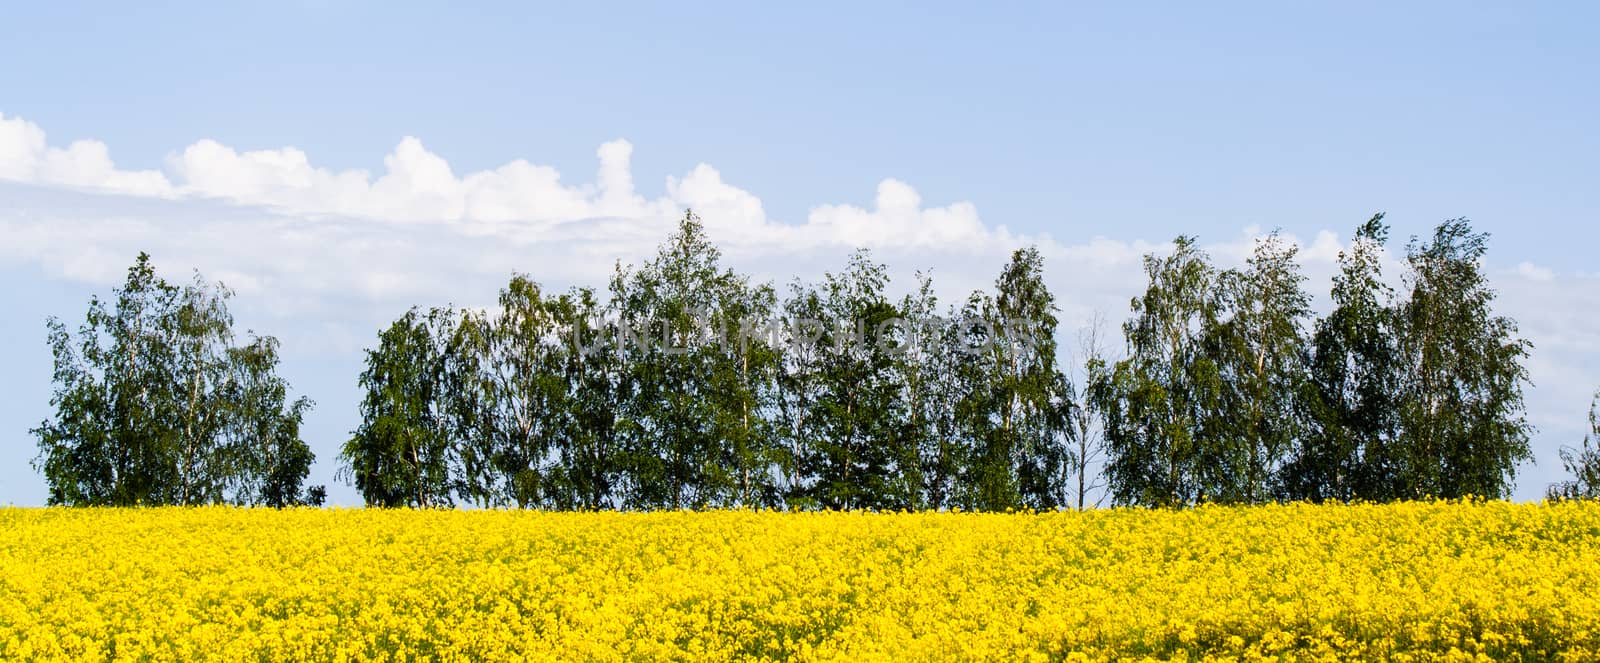 Beautiful field of bright yellow rape with trees by Sunmax